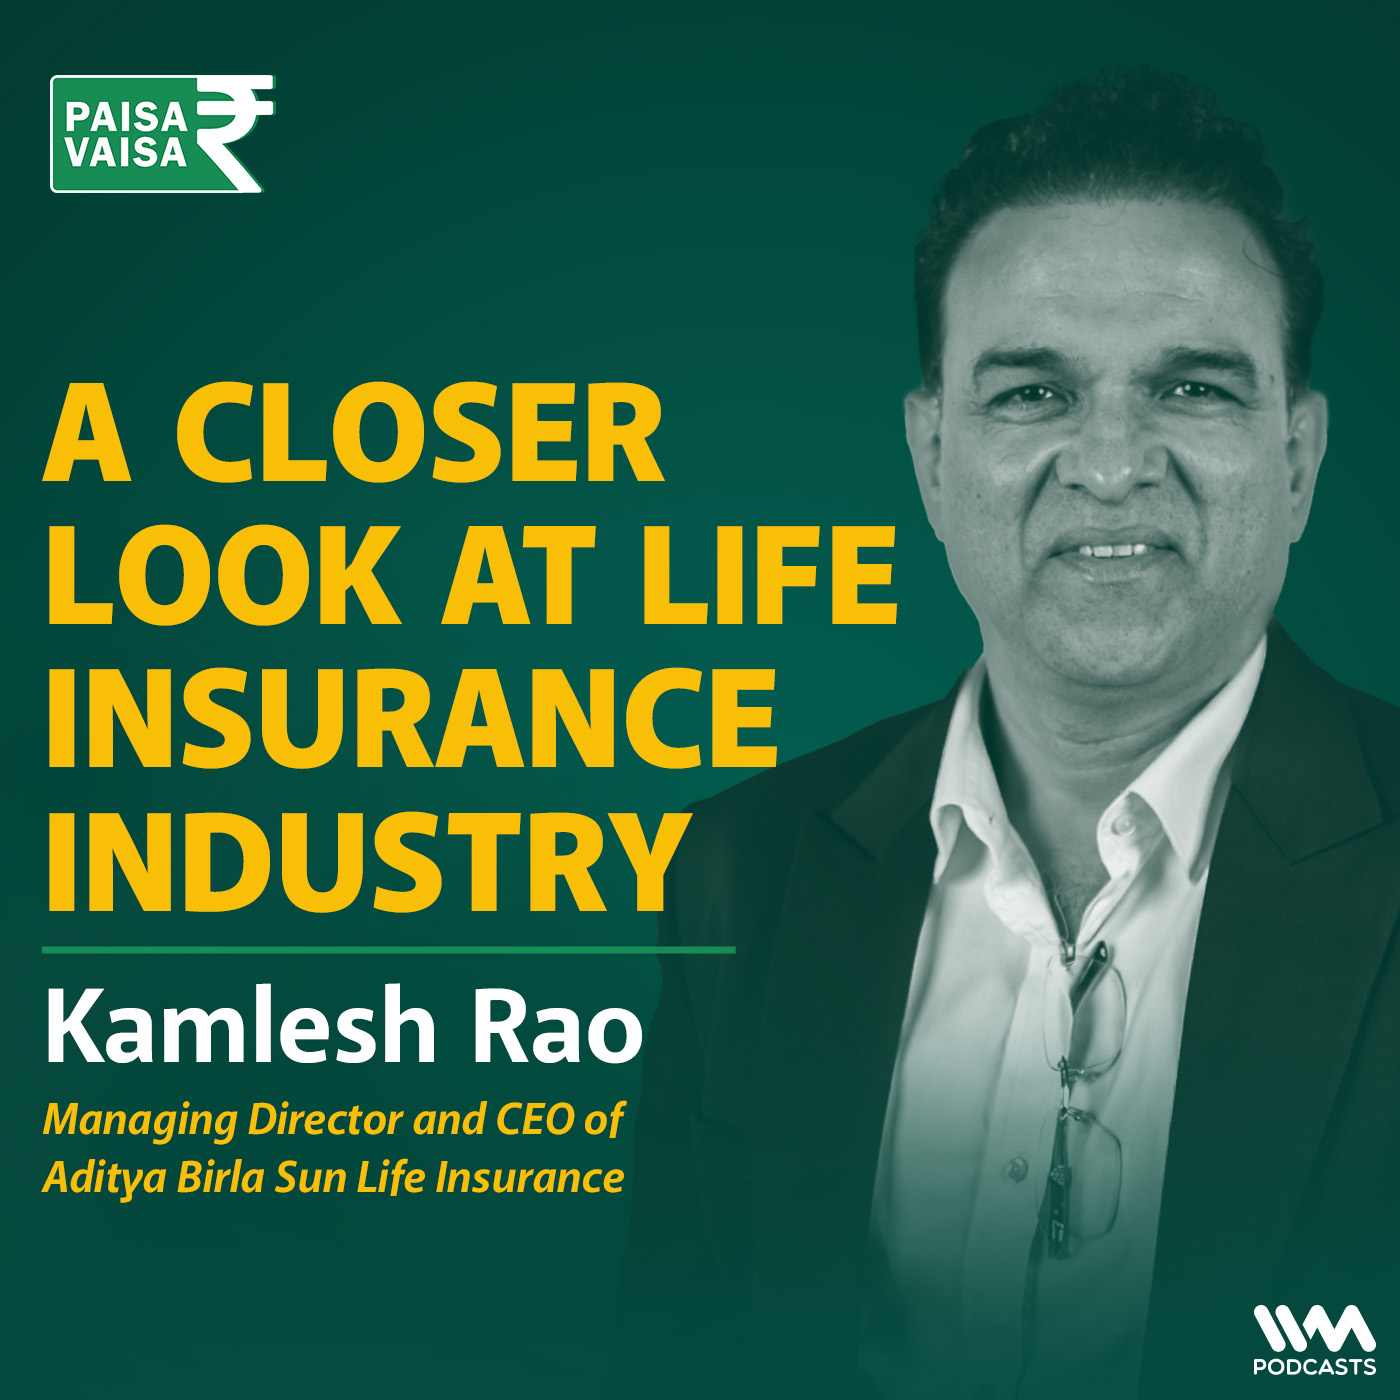 A Closer Look at Life Insurance Industry